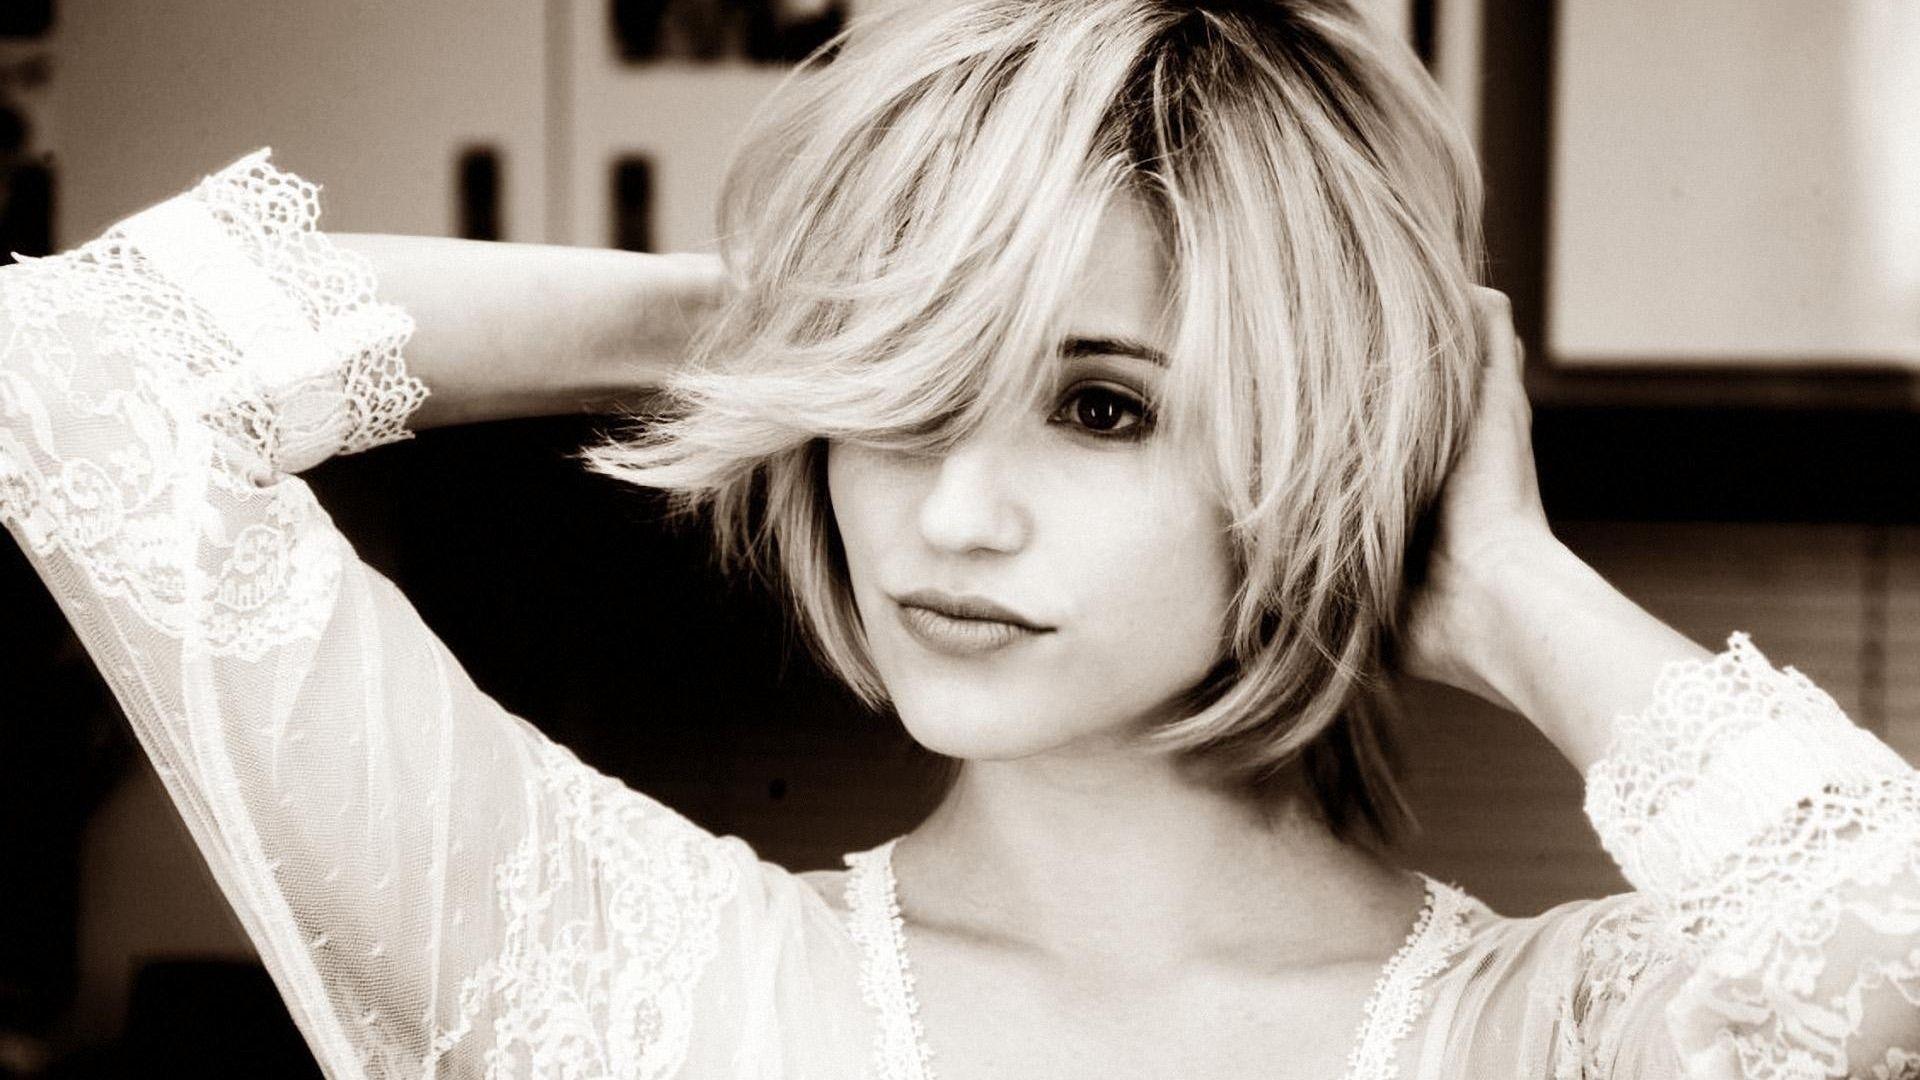 Dianna Agron Wallpaper Image Photo Picture Background